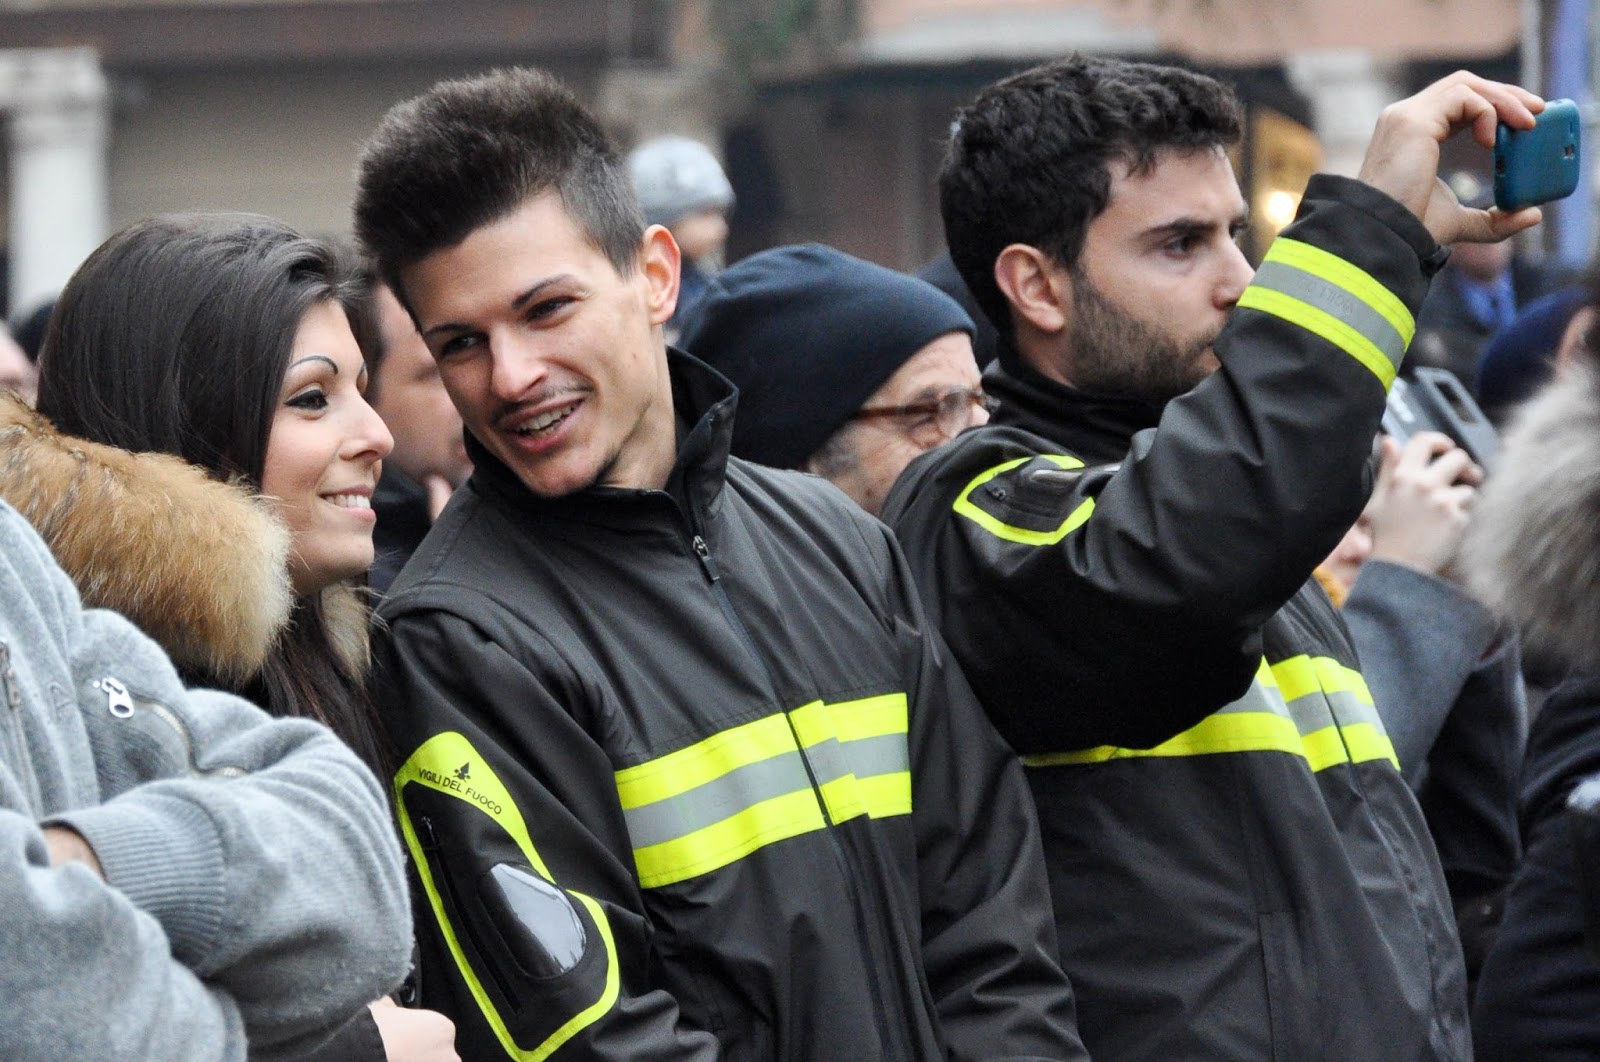 Firefighters watching their colleagues' demonstration on Piazza dei Signori, Saint Barbara celebration, Vicenza, Veneto, Italy